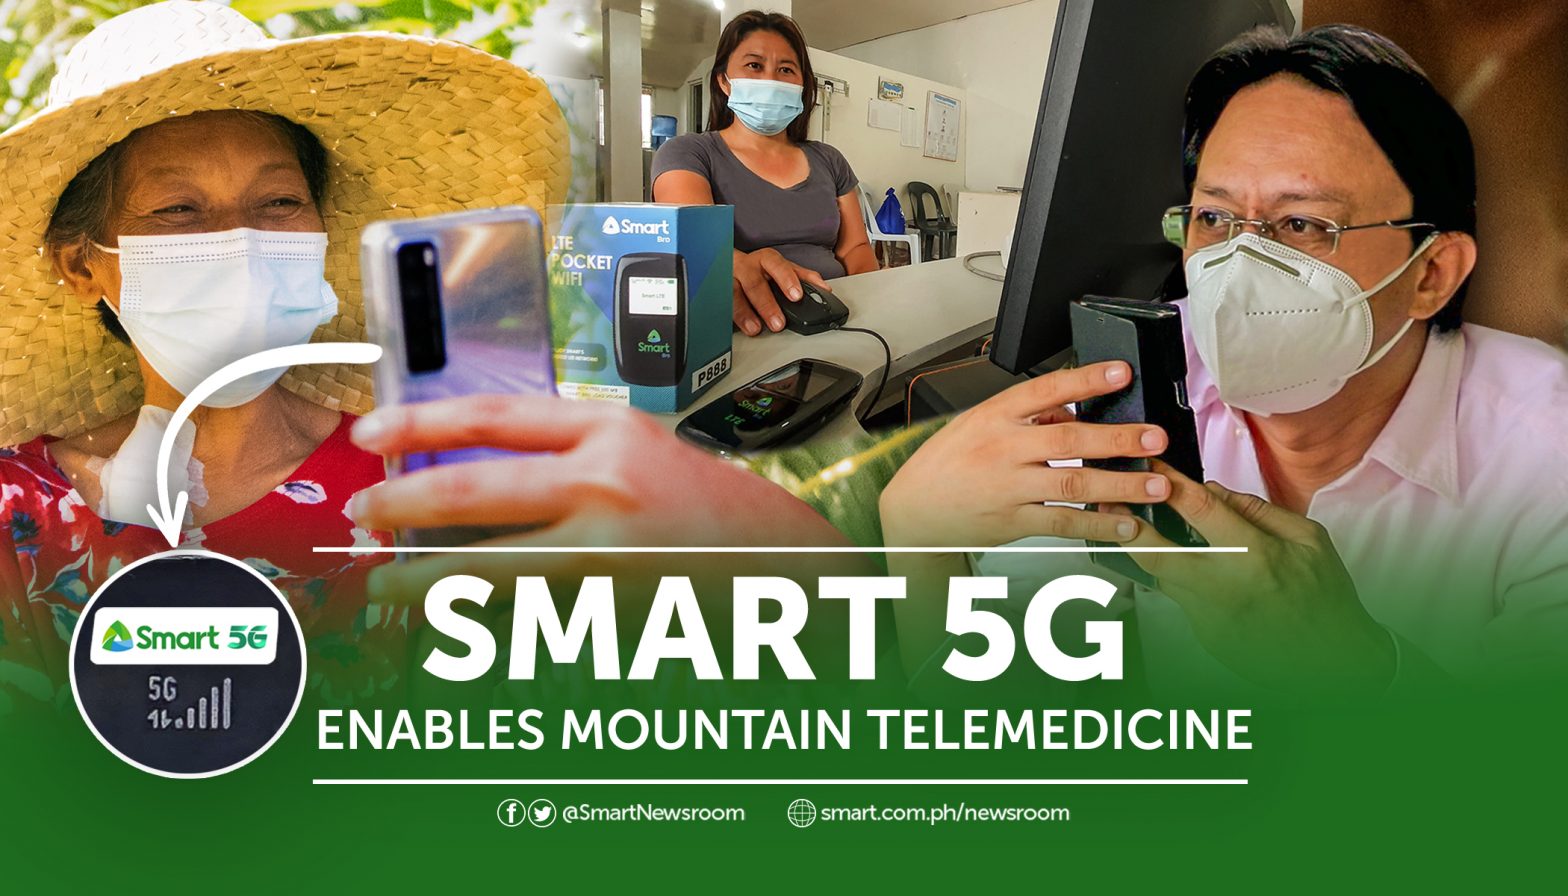 Smart’s 5G site in Argao enables mountain telemedicine, brings help and hope